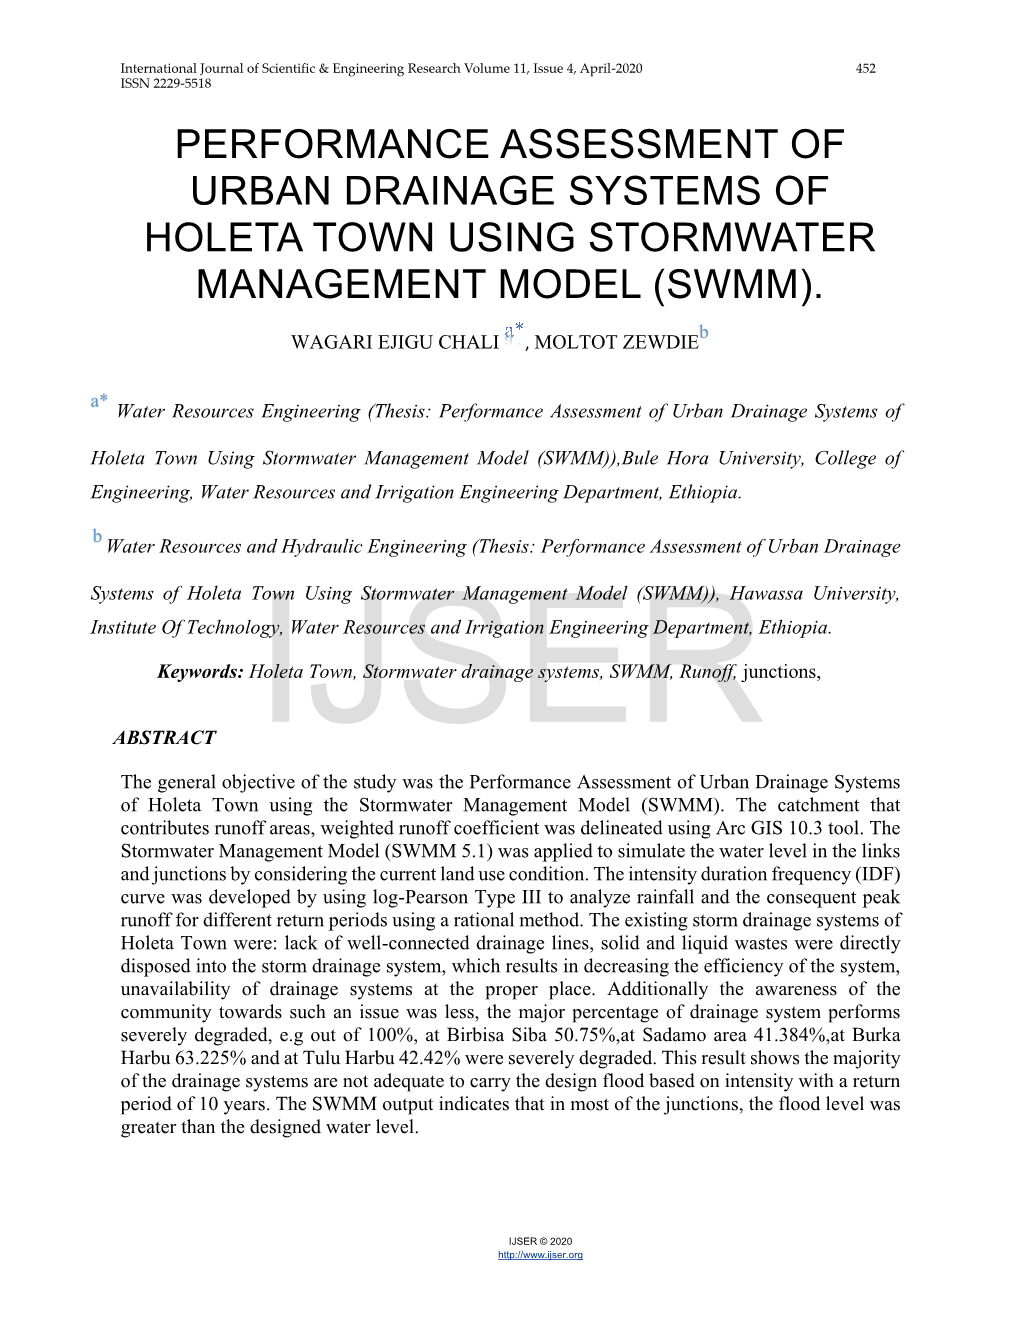 Performance Assessment of Urban Drainage Systems of Holeta Town Using Stormwater Management Model (Swmm)